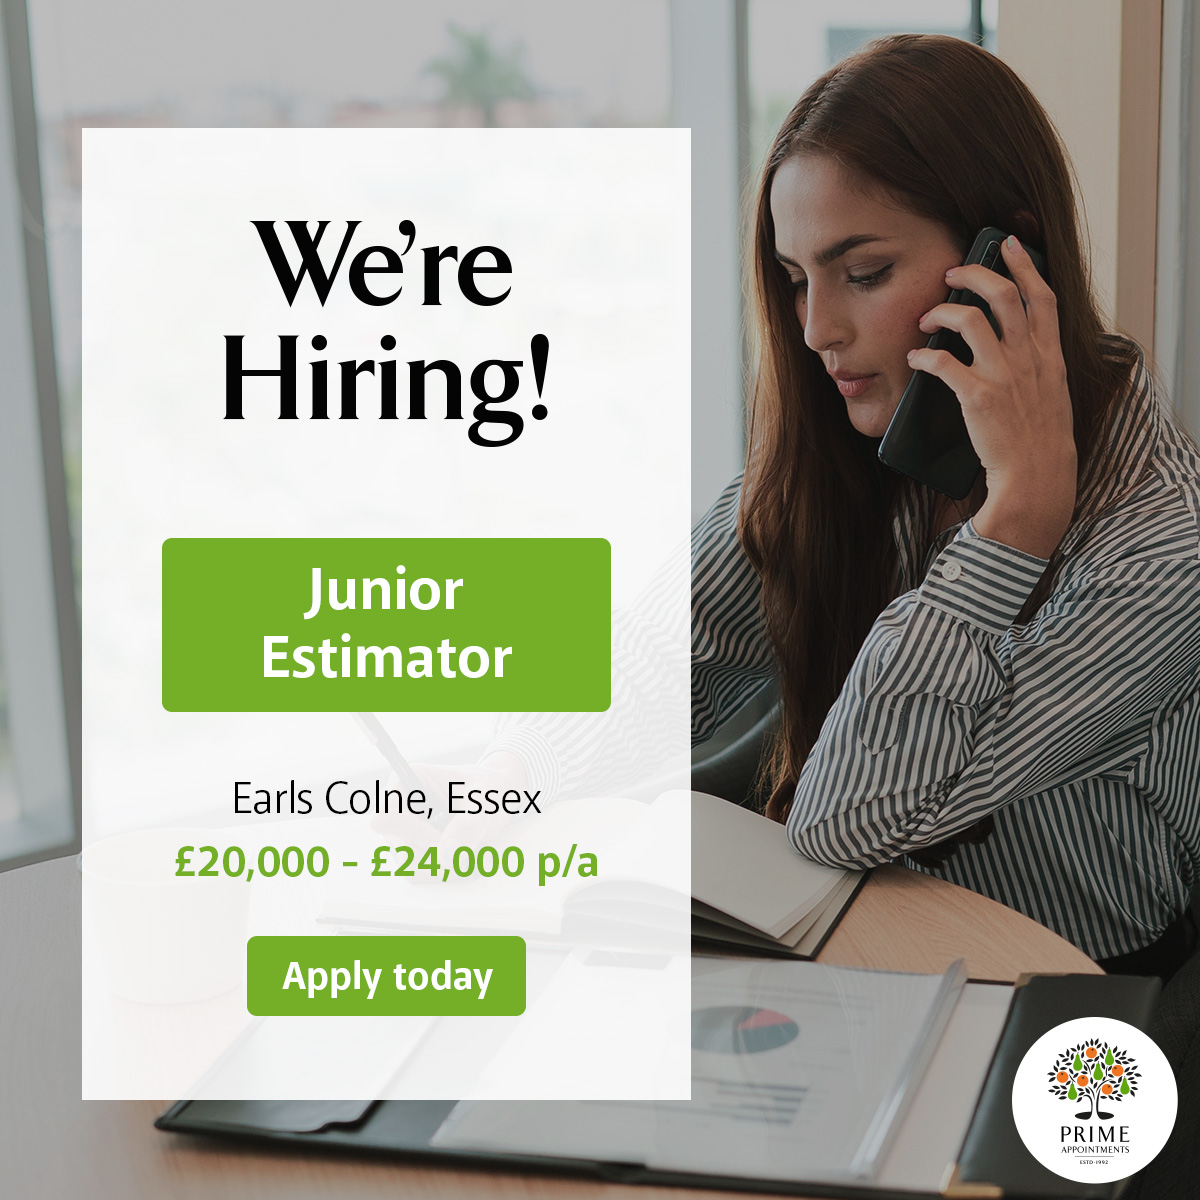 Are you on the hunt for an entry-level position in estimation? Well, you've come to the right place! Explore our available positions here >>>> ow.ly/K83v50PIPMr? specialist_devision%5B%5D=Commercial%20%26%20Office #JuniorEstimator #Commercialjobs #Estimator